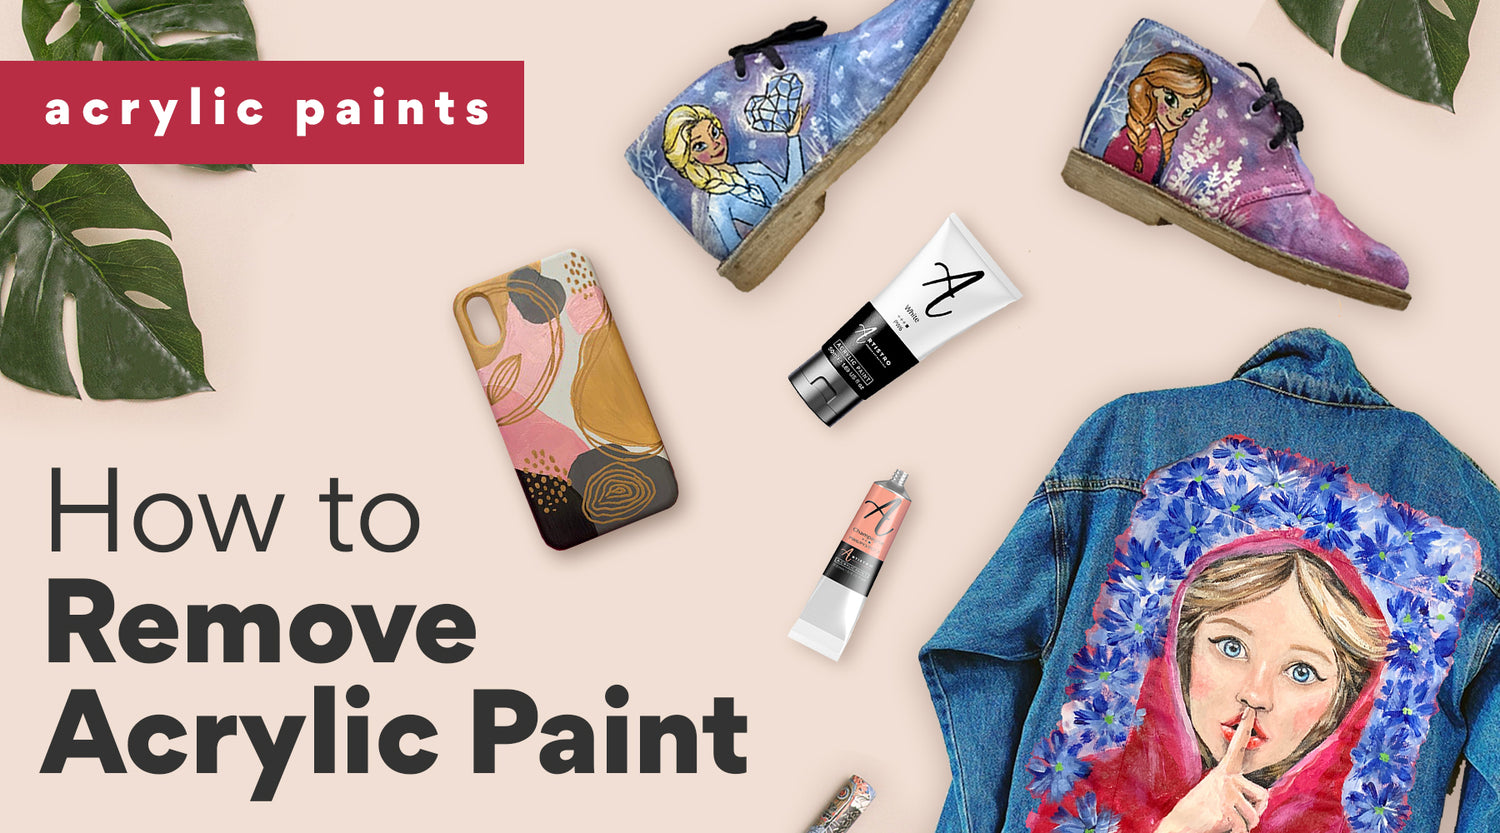 Tips For Removing Acrylic Paint From Clothing - Pinot's Palette